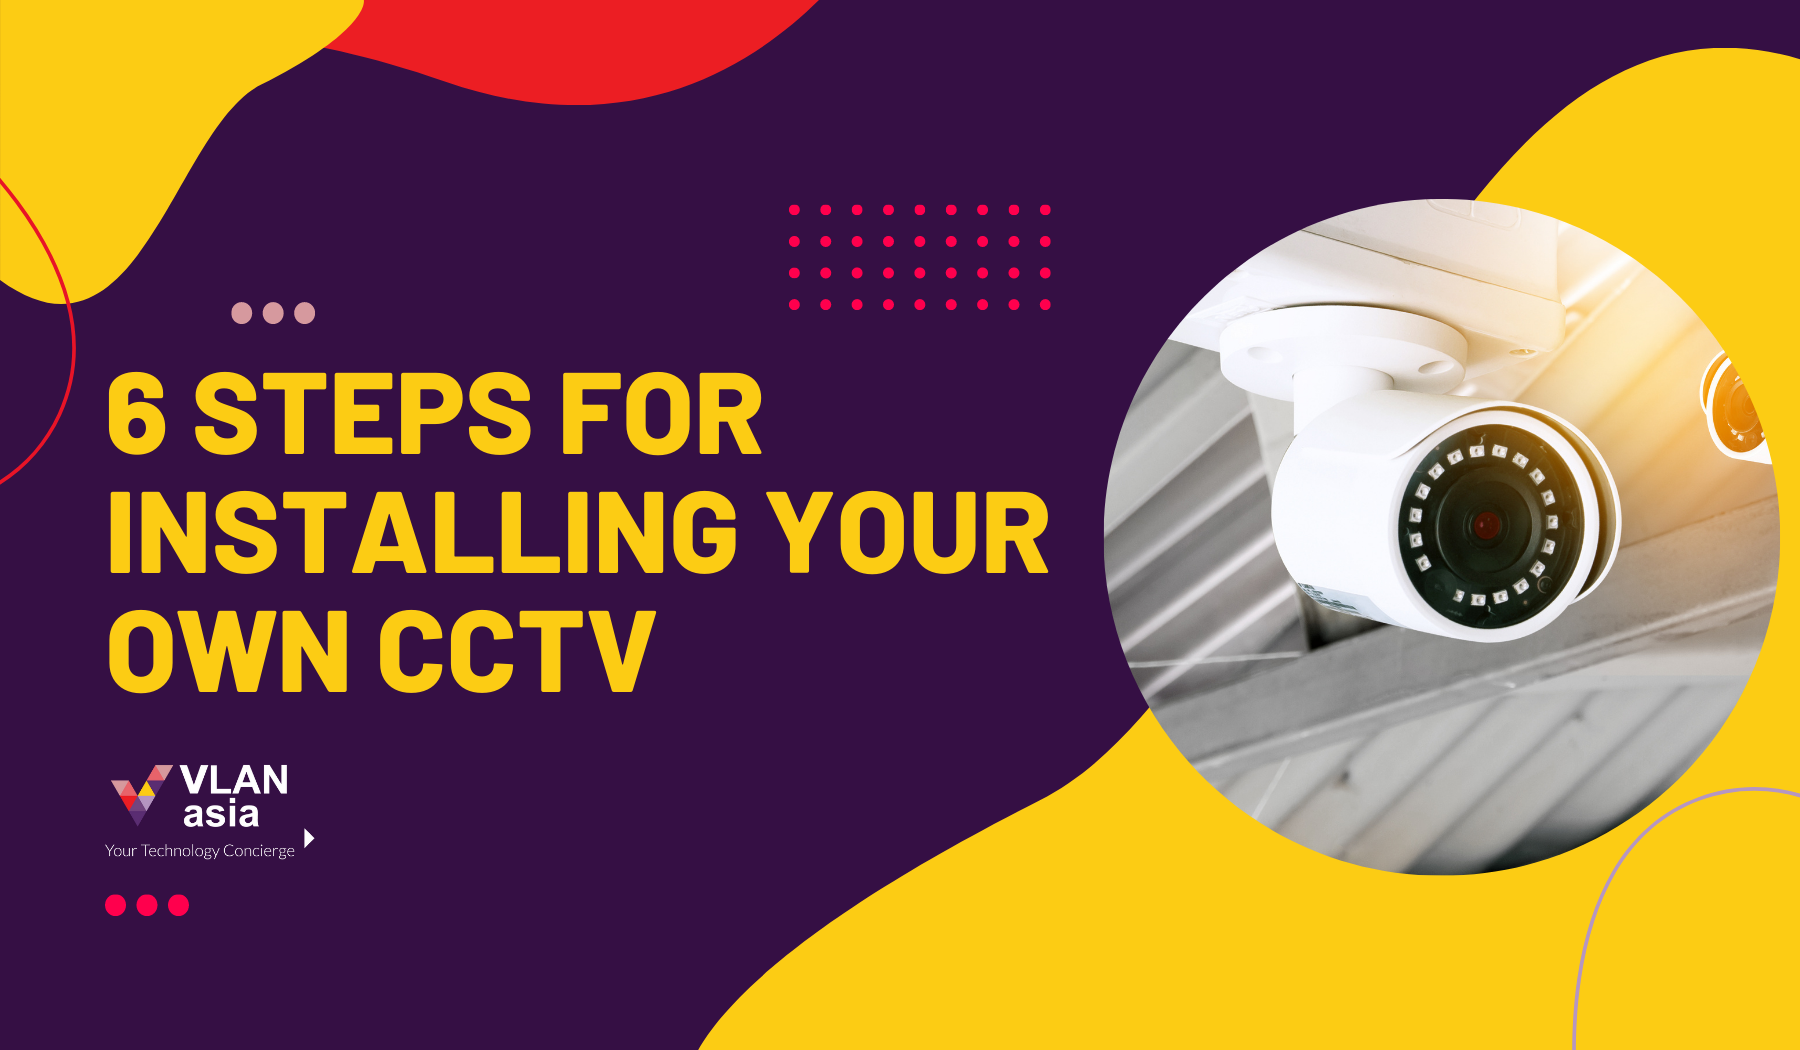 6 Steps for installing your own CCTV